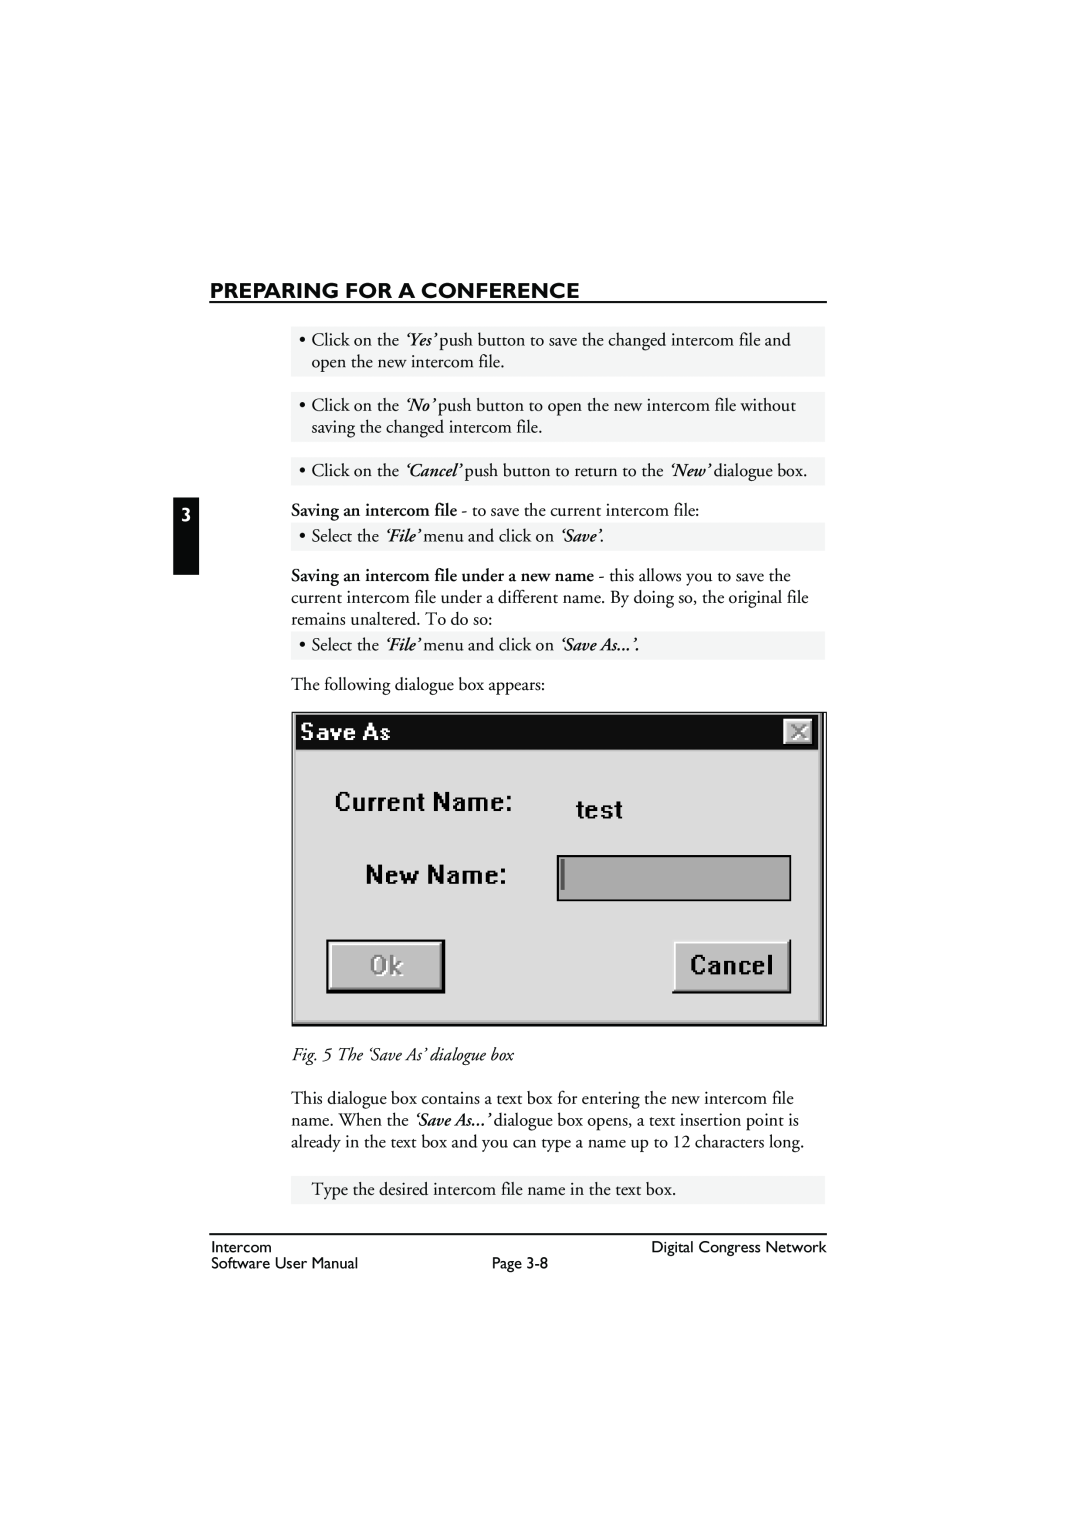 Bosch Appliances LBB 3573 user manual The ‘Save As’ dialogue box, Preparing For A Conference 